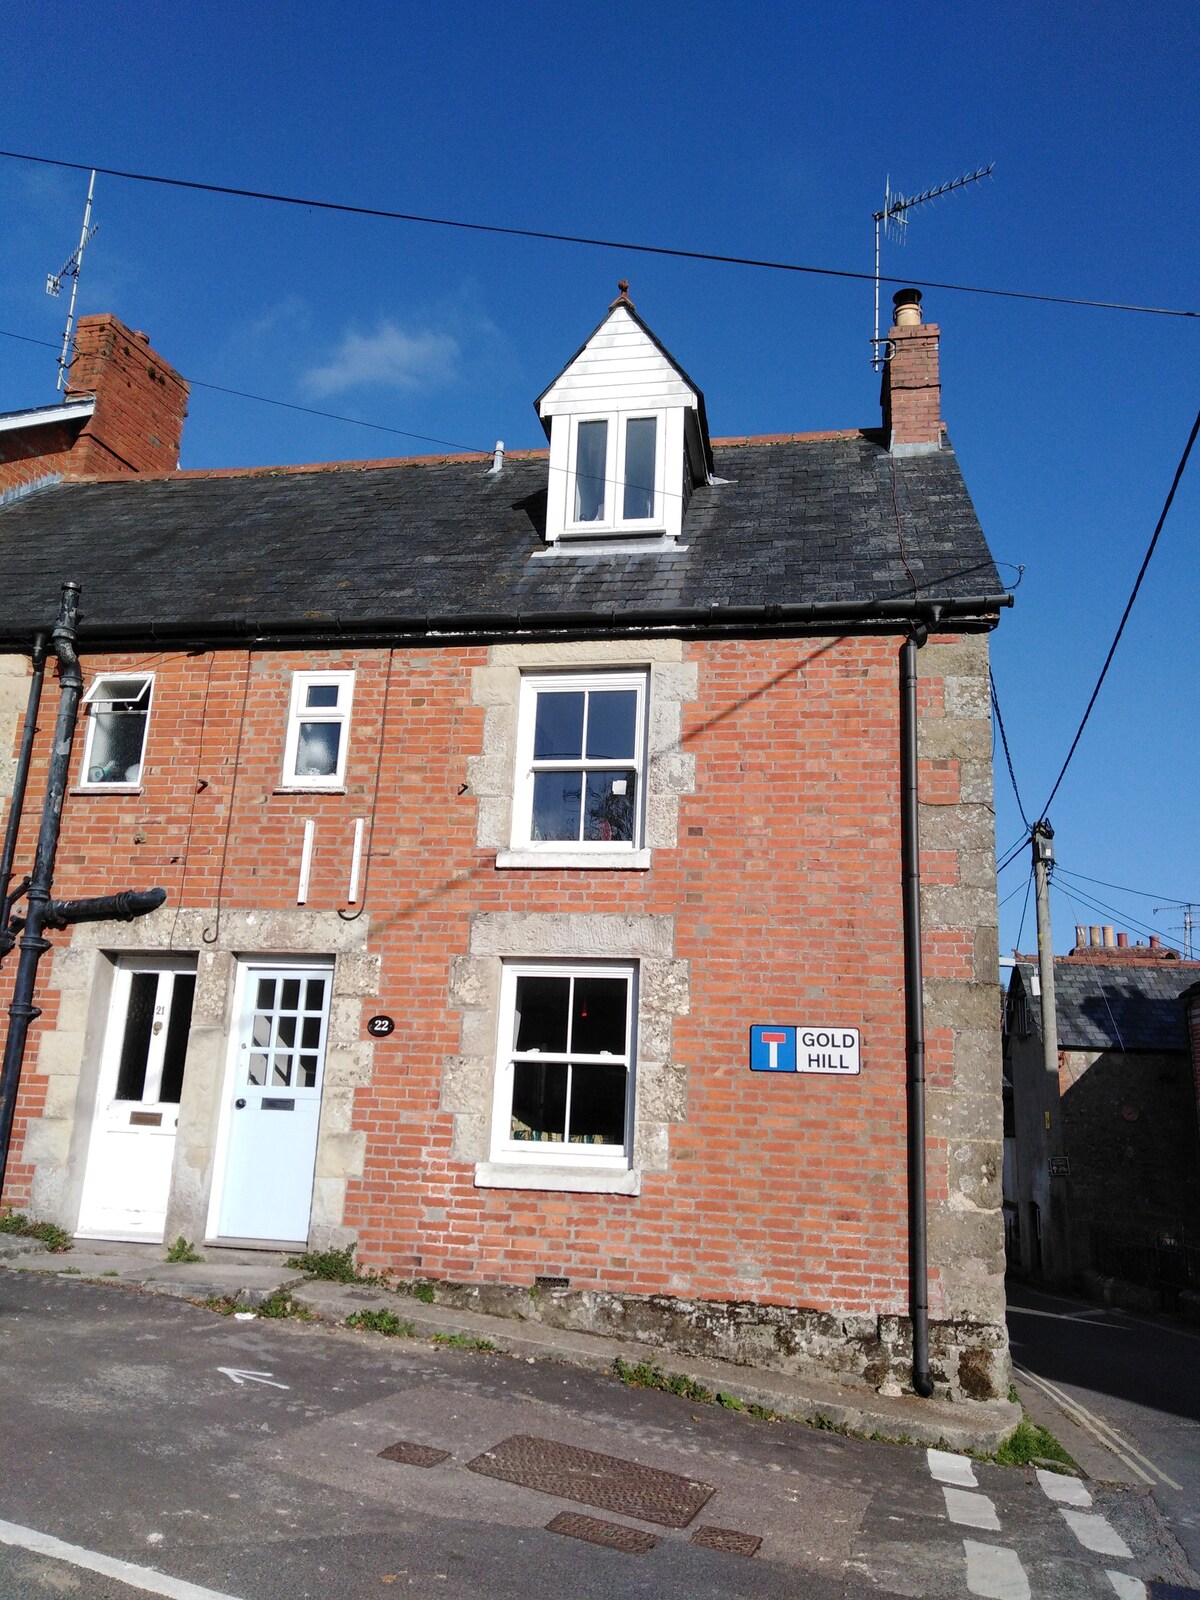 "Hovis Hill" Cottage, Gold Hill, Shaftesbury.